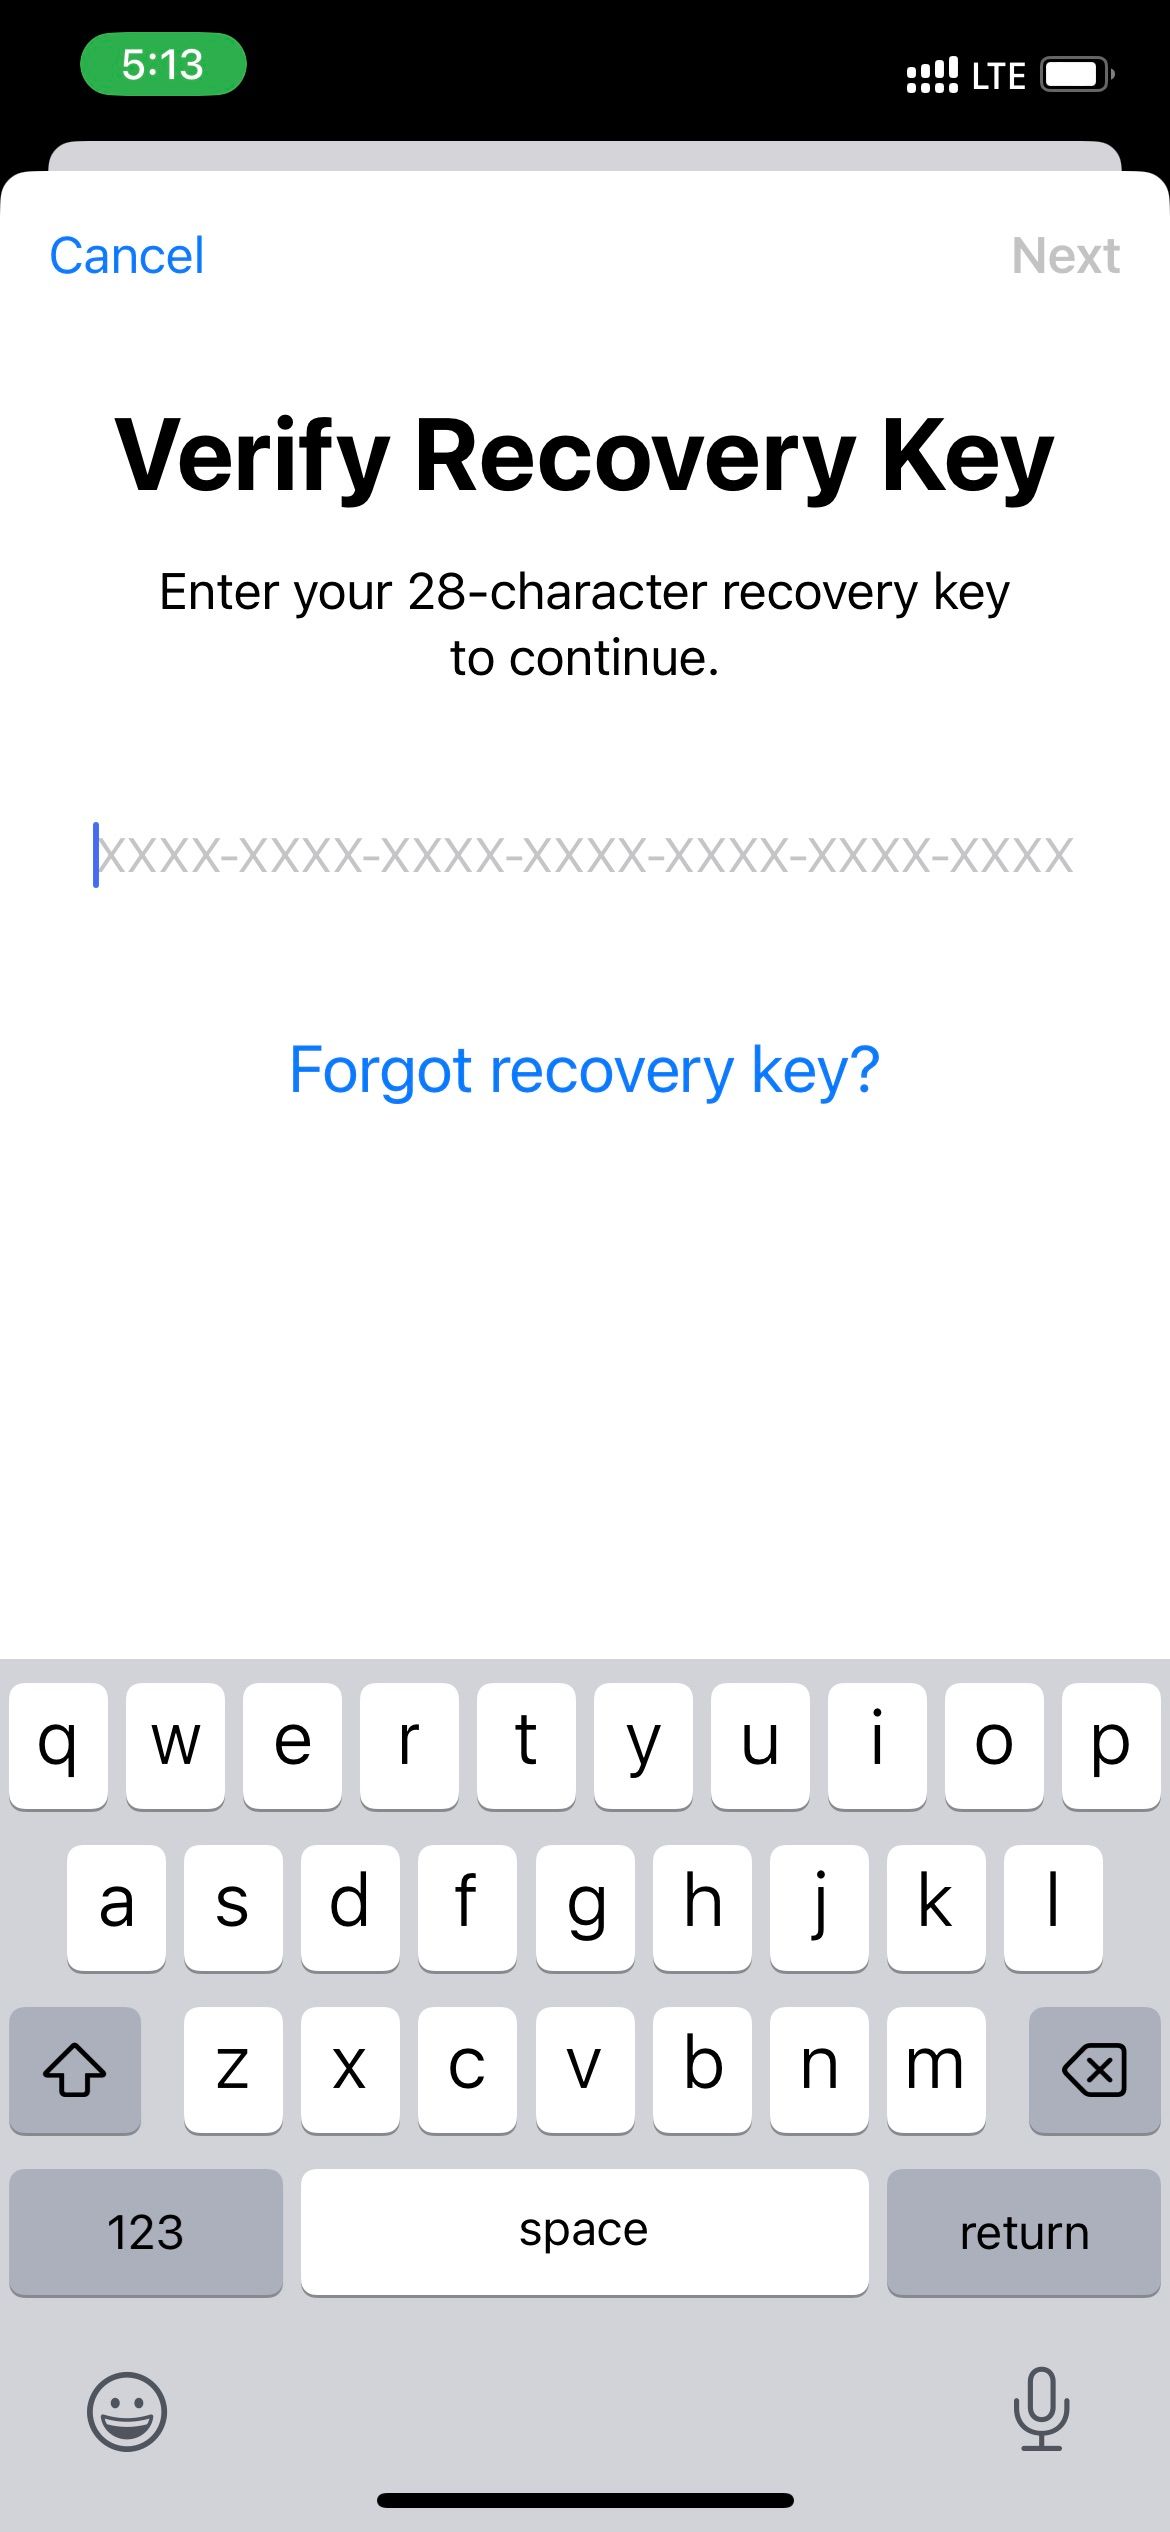 Enter your 28-character recovery key for verification